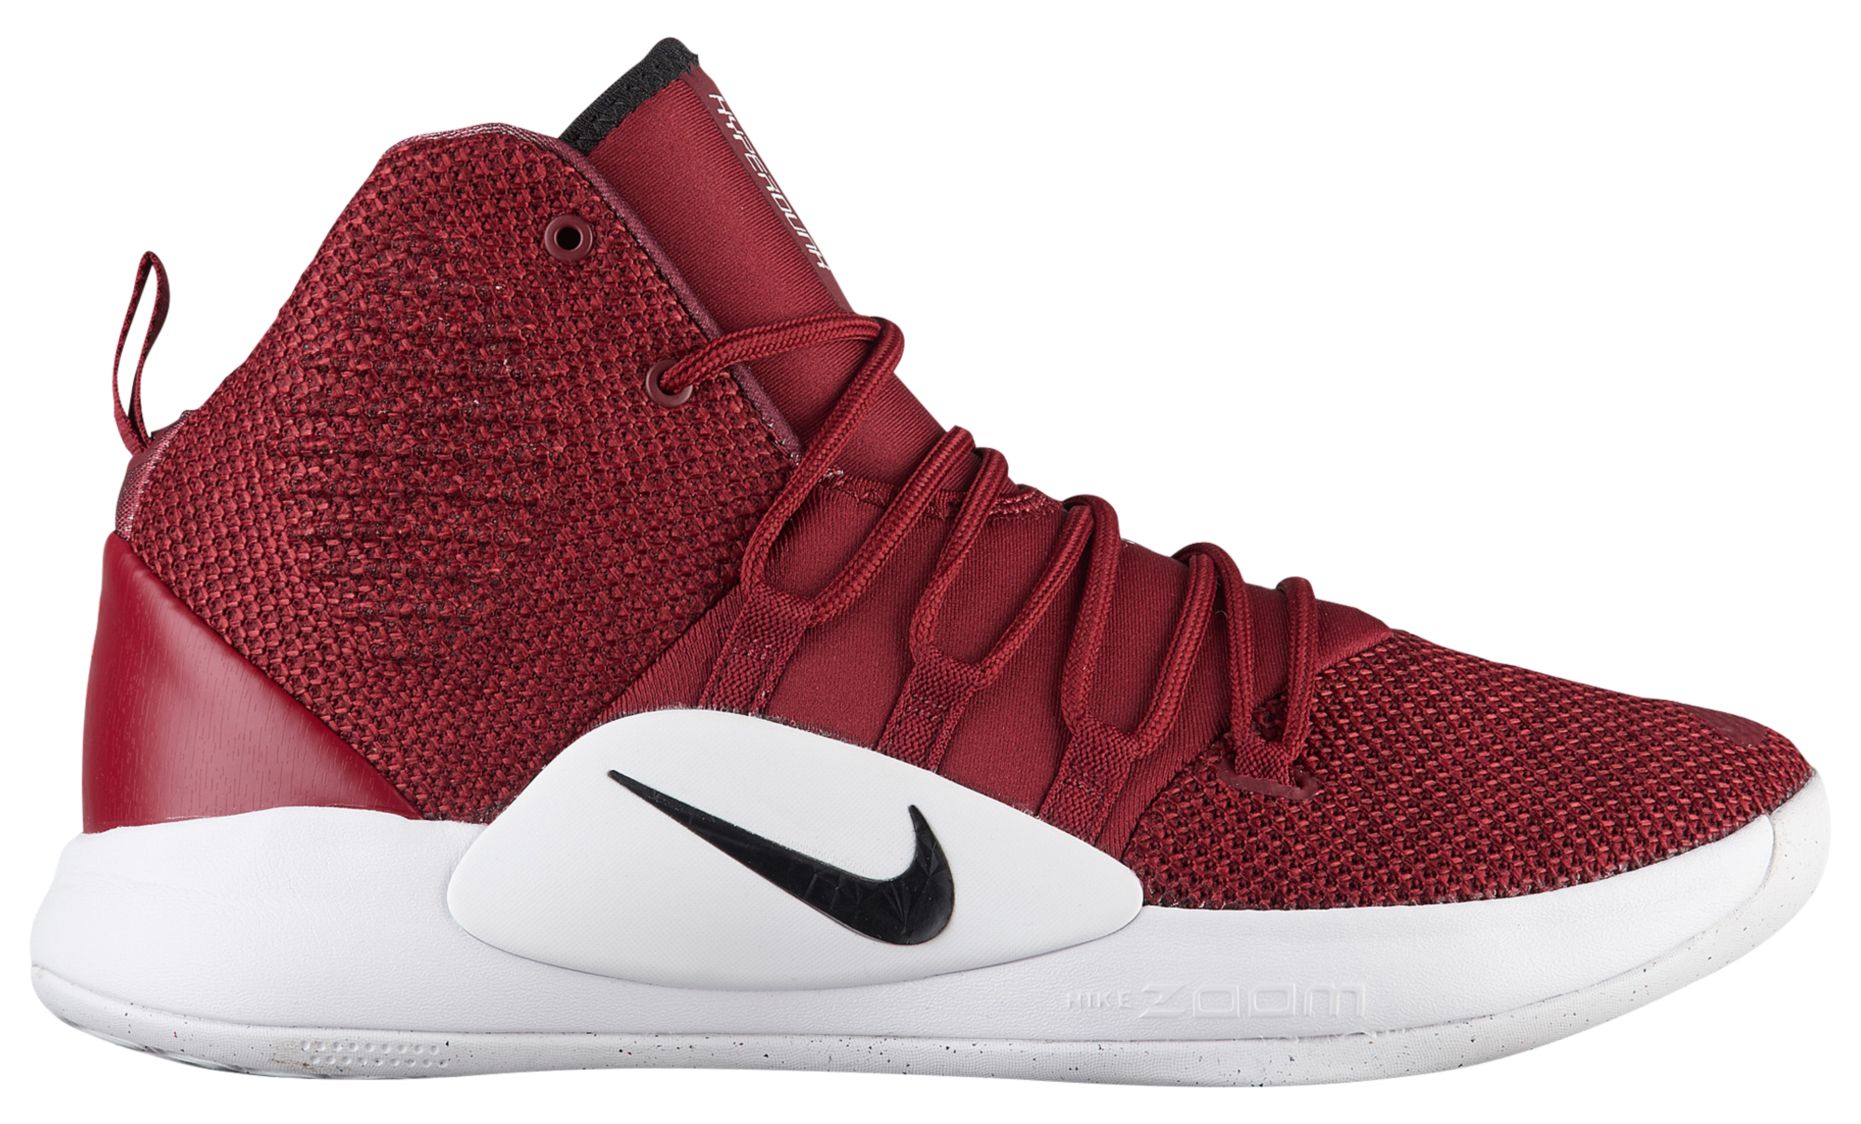 The Nike Hyperdunk Has Arrived in Team Colorways - WearTesters